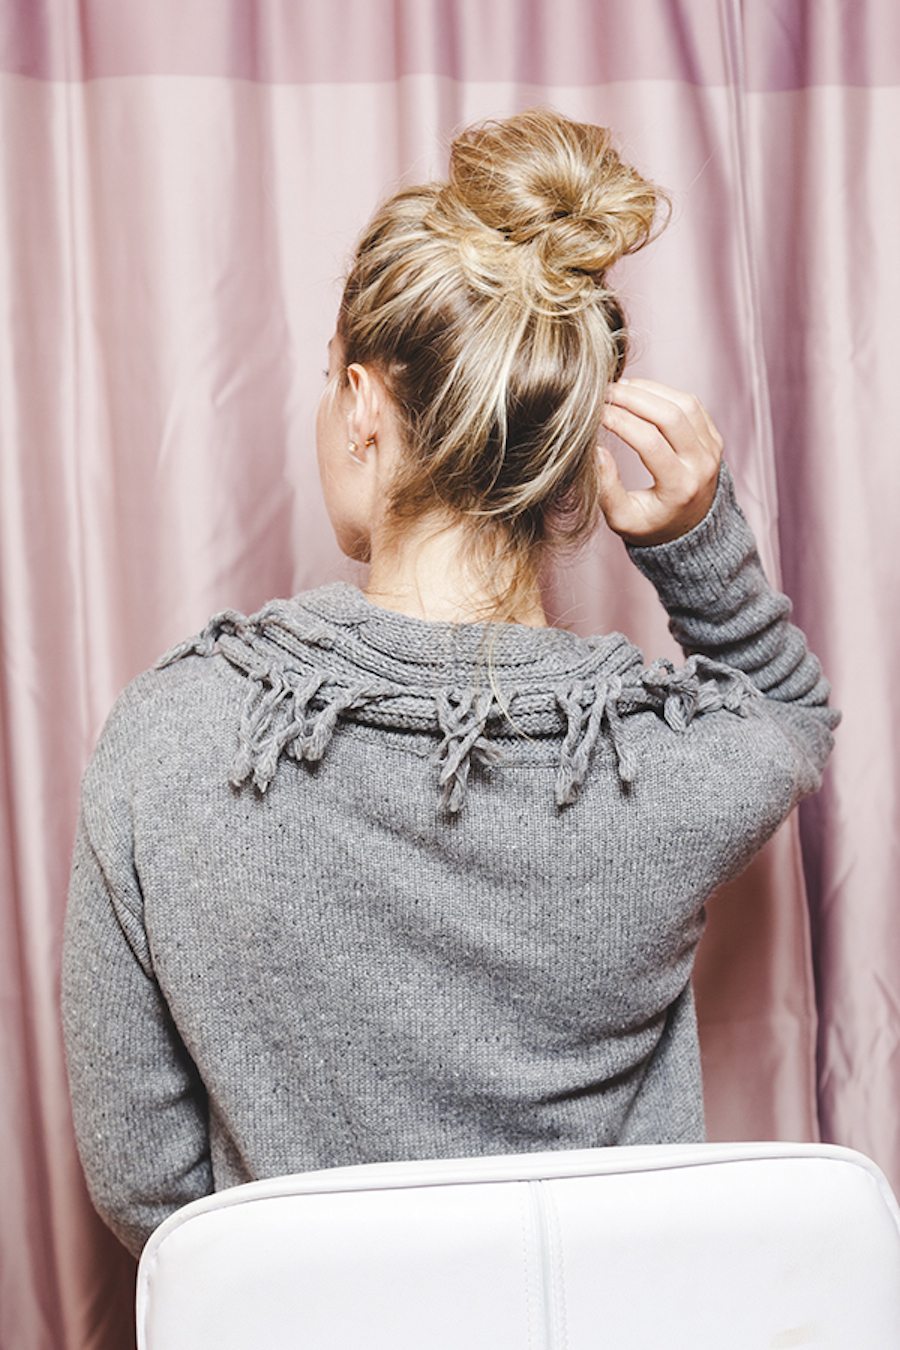 round messy top knot